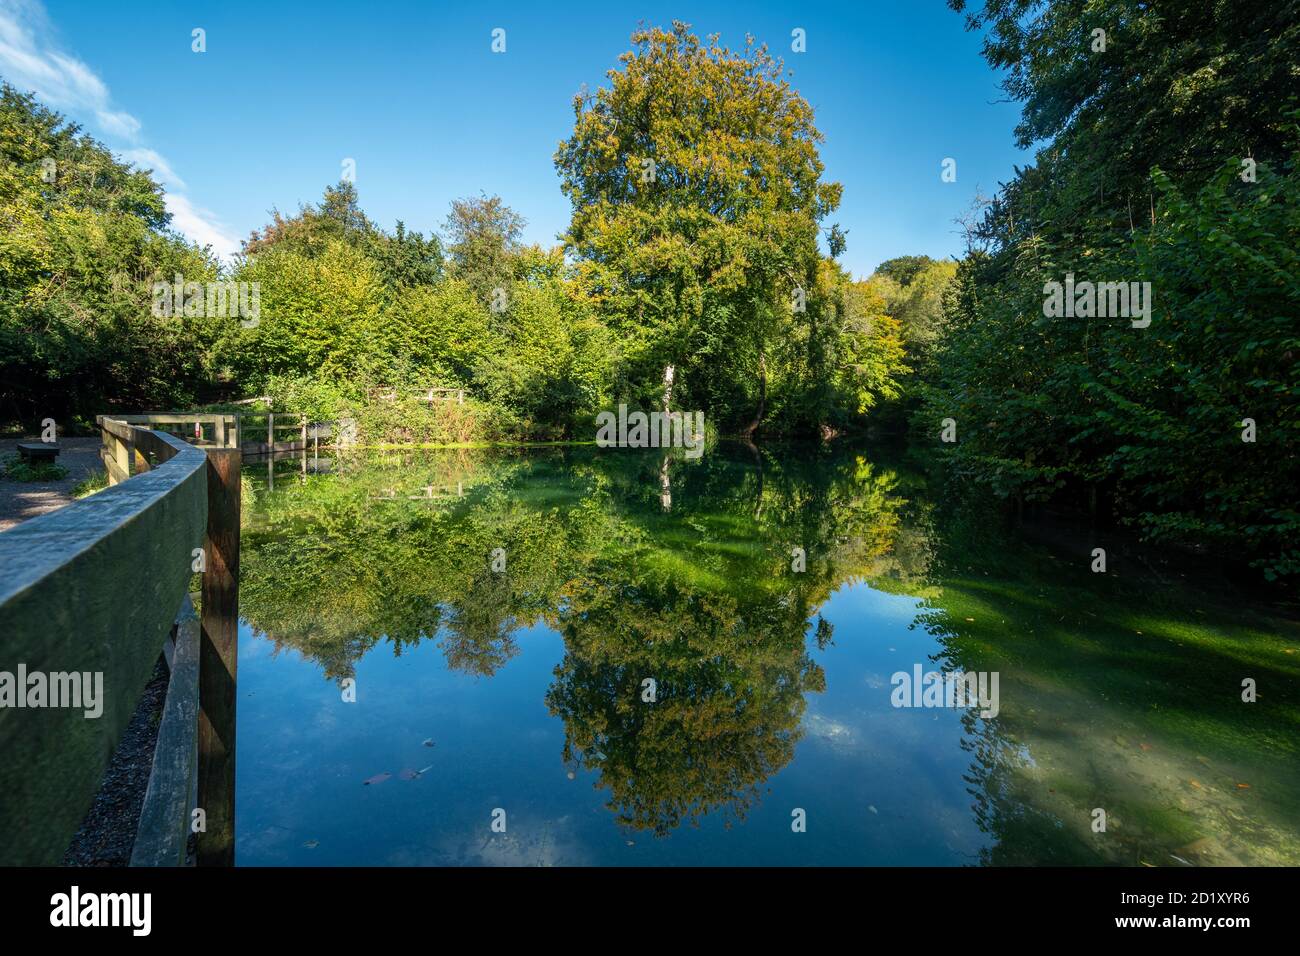 Silent Pool, view of the pond during autumn, Surrey, UK Stock Photo